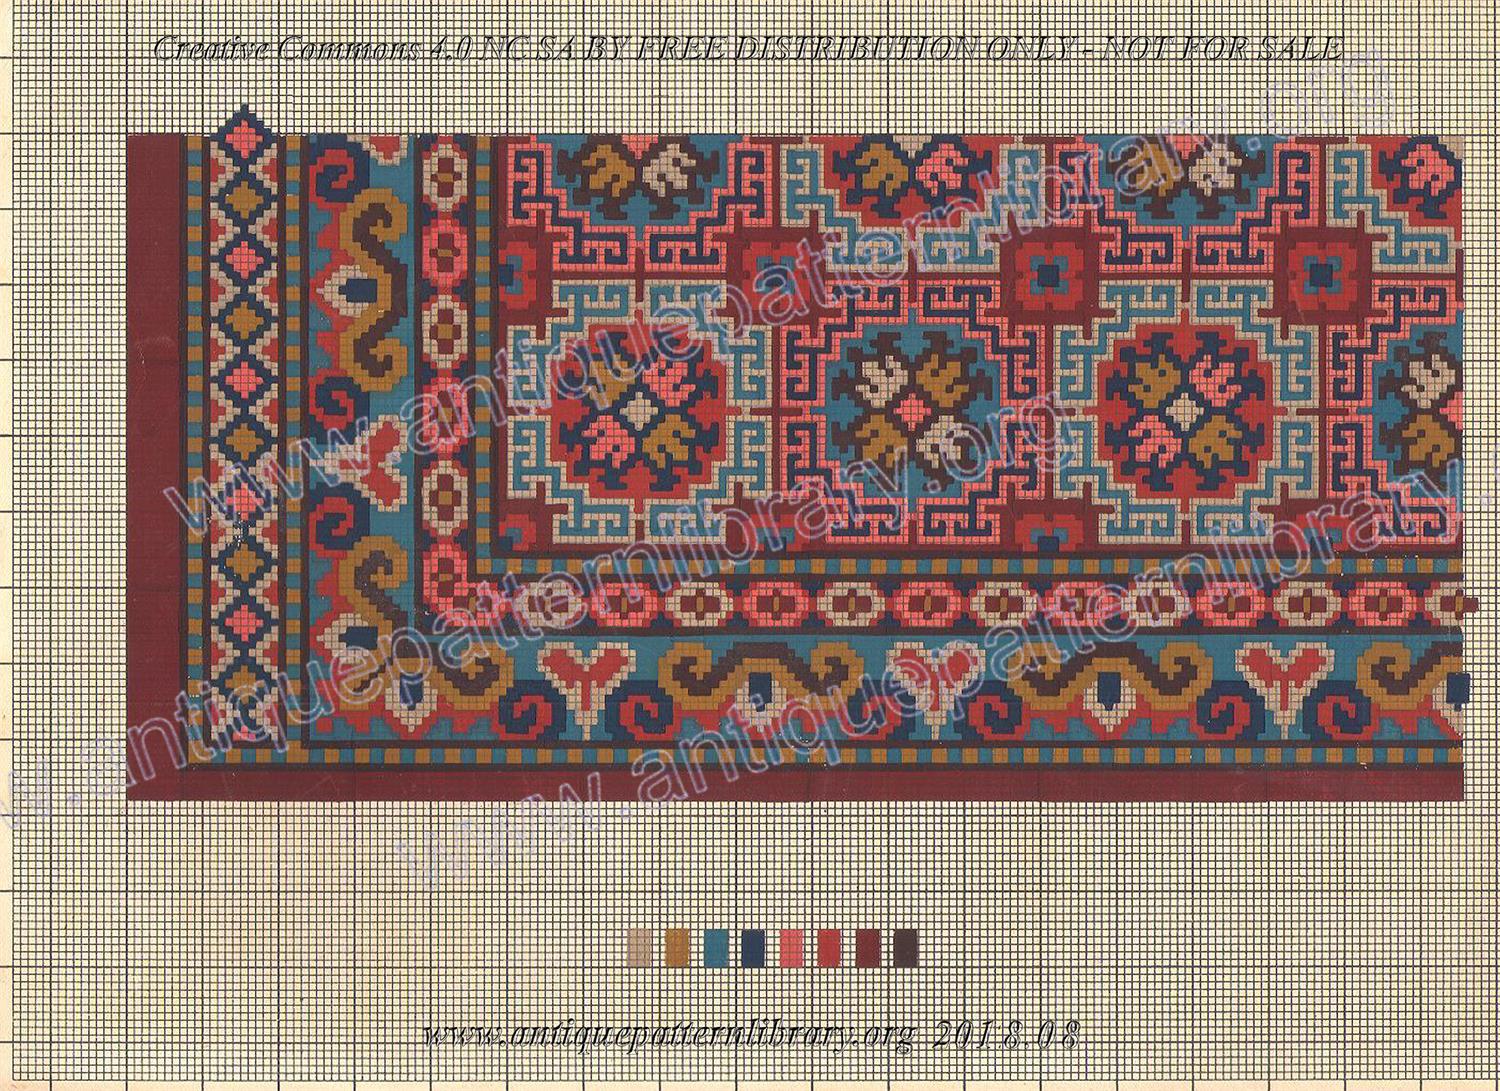 A-MH001 Tapestry design